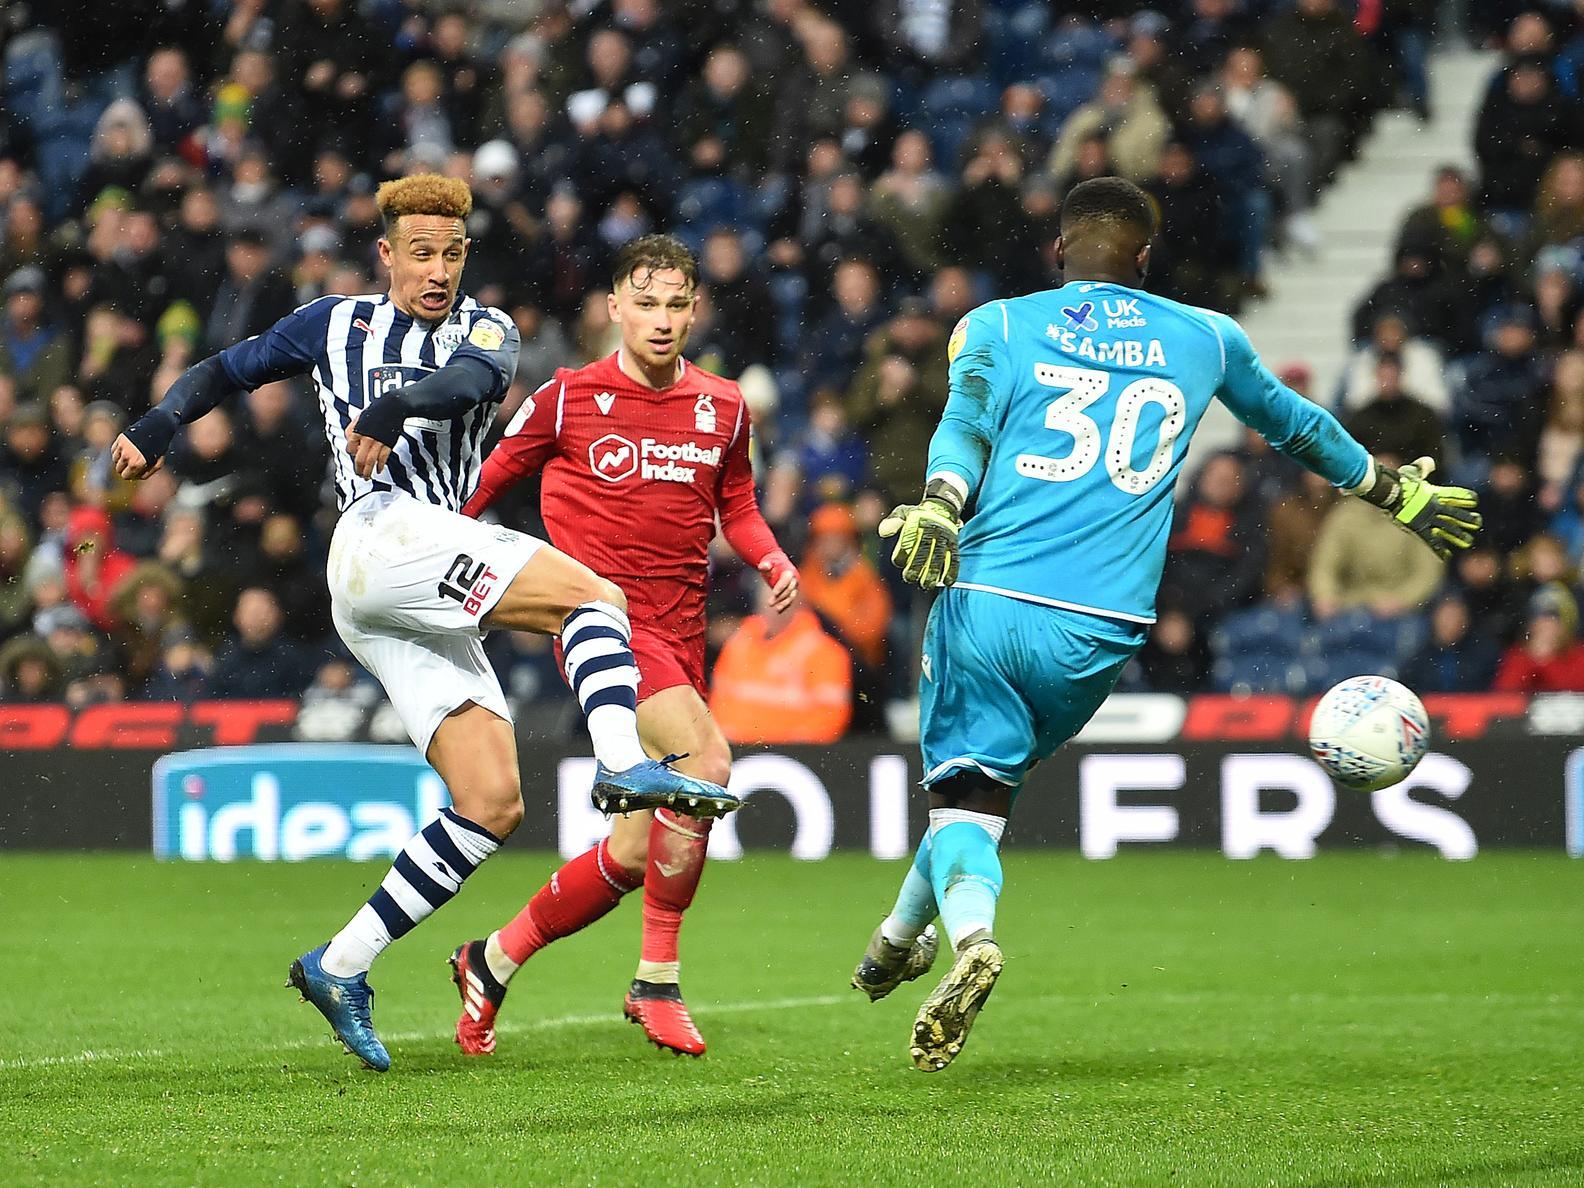 Ex-Leeds United man Noel Whelan has slammed the club for not looking to loan Sheffield United's Callum Robinson in January. He scored his first goal on his temporary spell with West Brom last weekend. (Football Insider)